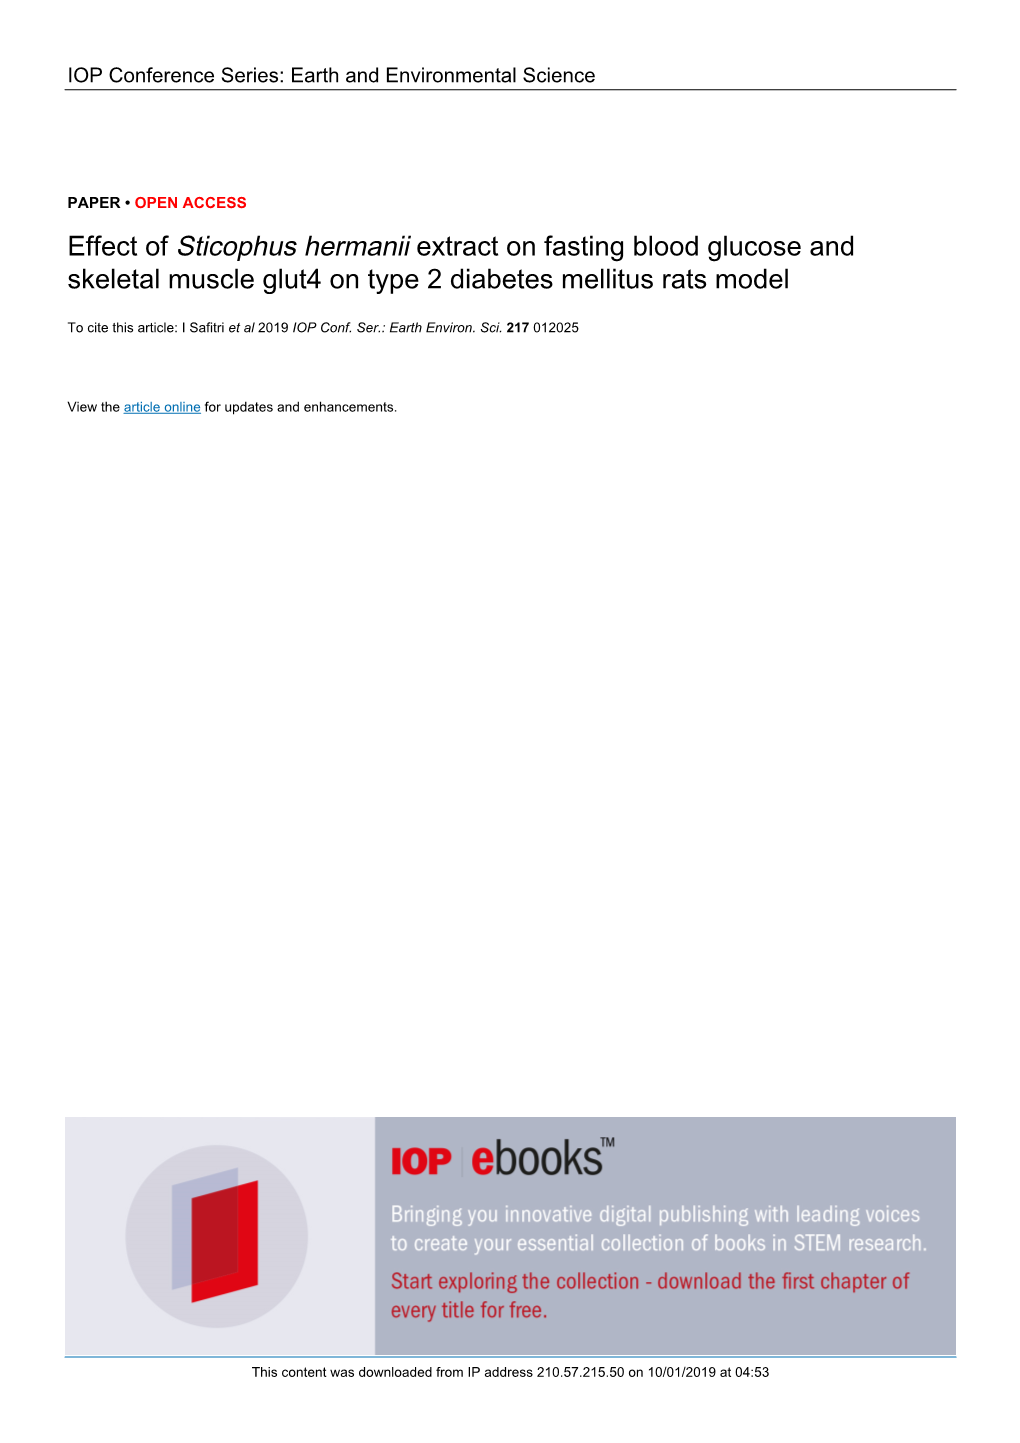 Effect of Sticophus Hermanii Extract on Fasting Blood Glucose and Skeletal Muscle Glut4 on Type 2 Diabetes Mellitus Rats Model